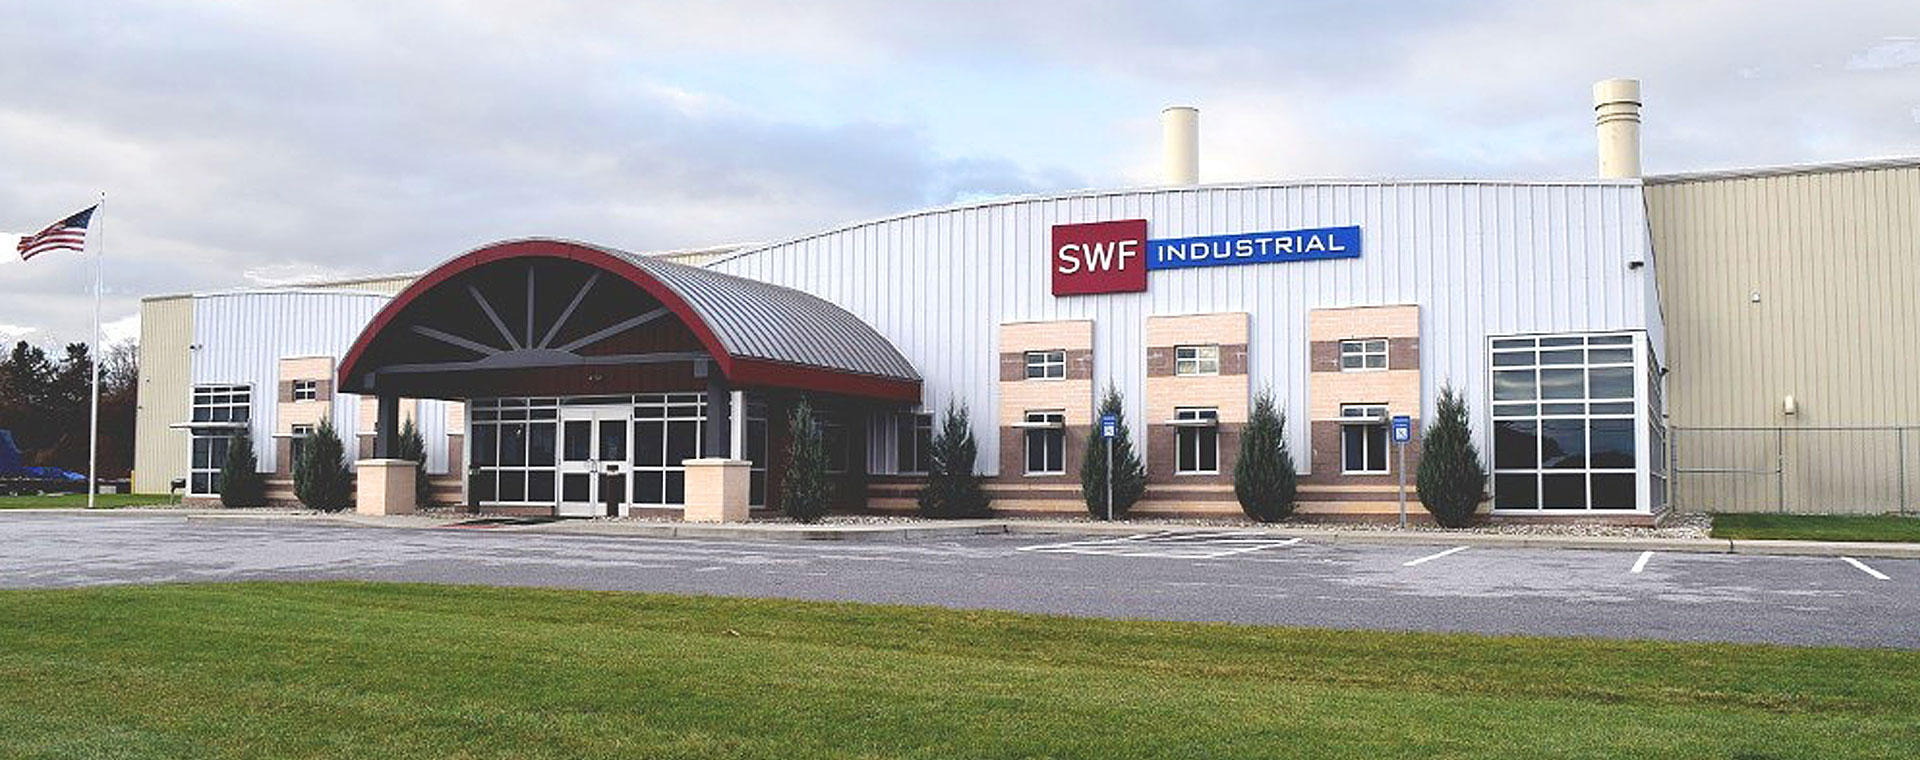 SWF Industrial building shown from front facing shot, with red canopy and large warehouse shown behind office